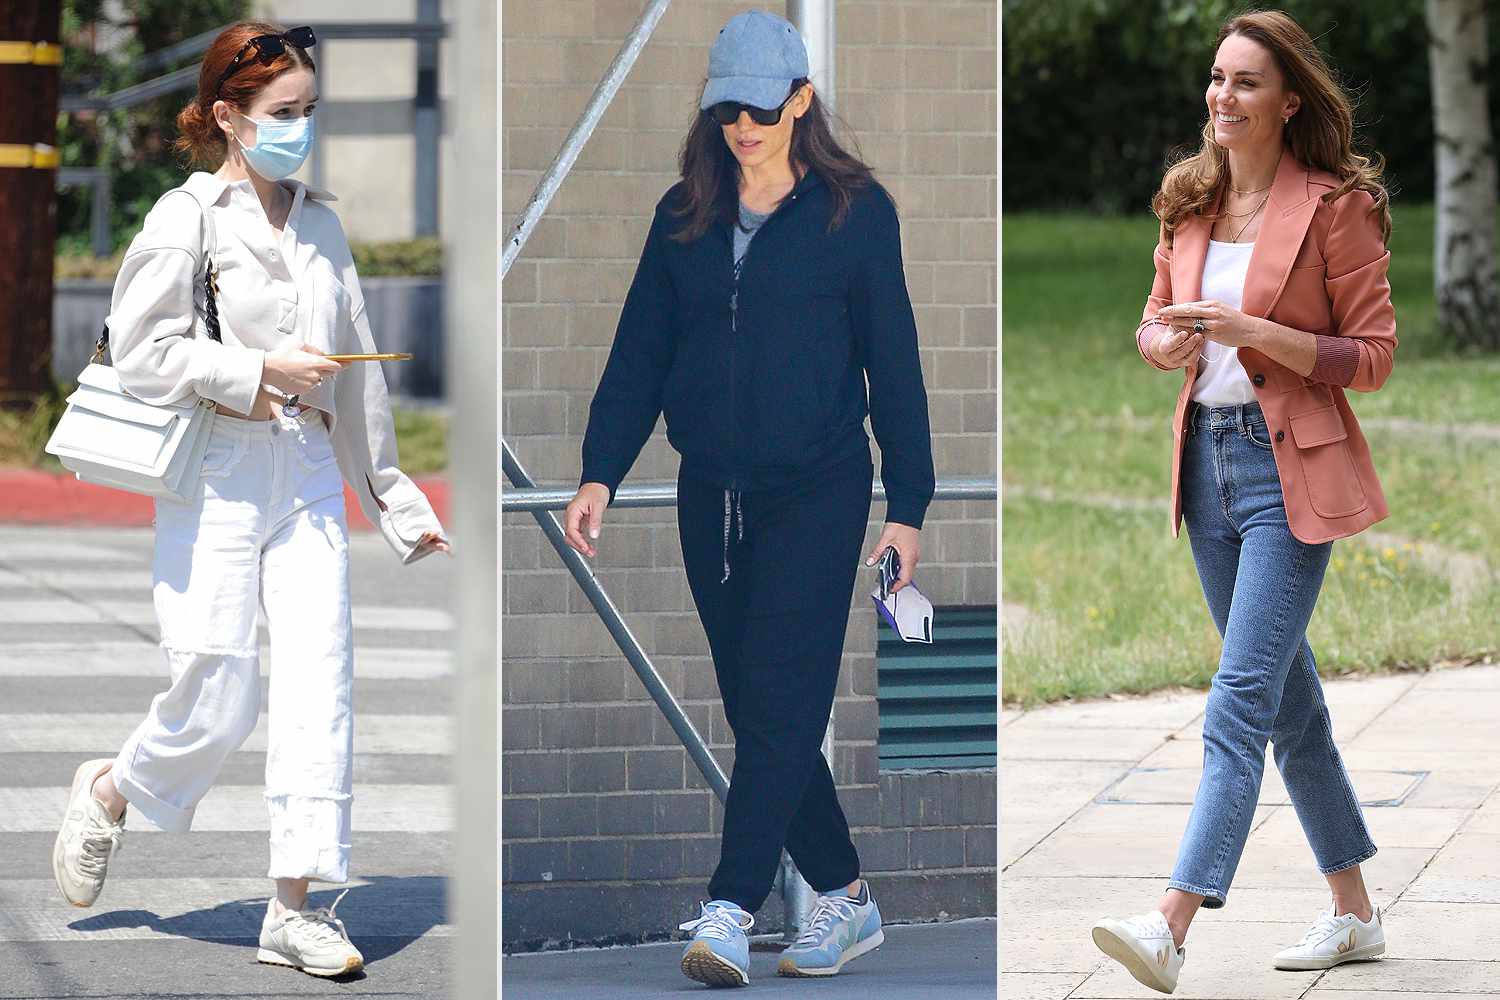 The French Sneakers Kate Middleton and Jennifer Garner Both Wear Are Secretly on Sale for 72 More Hours